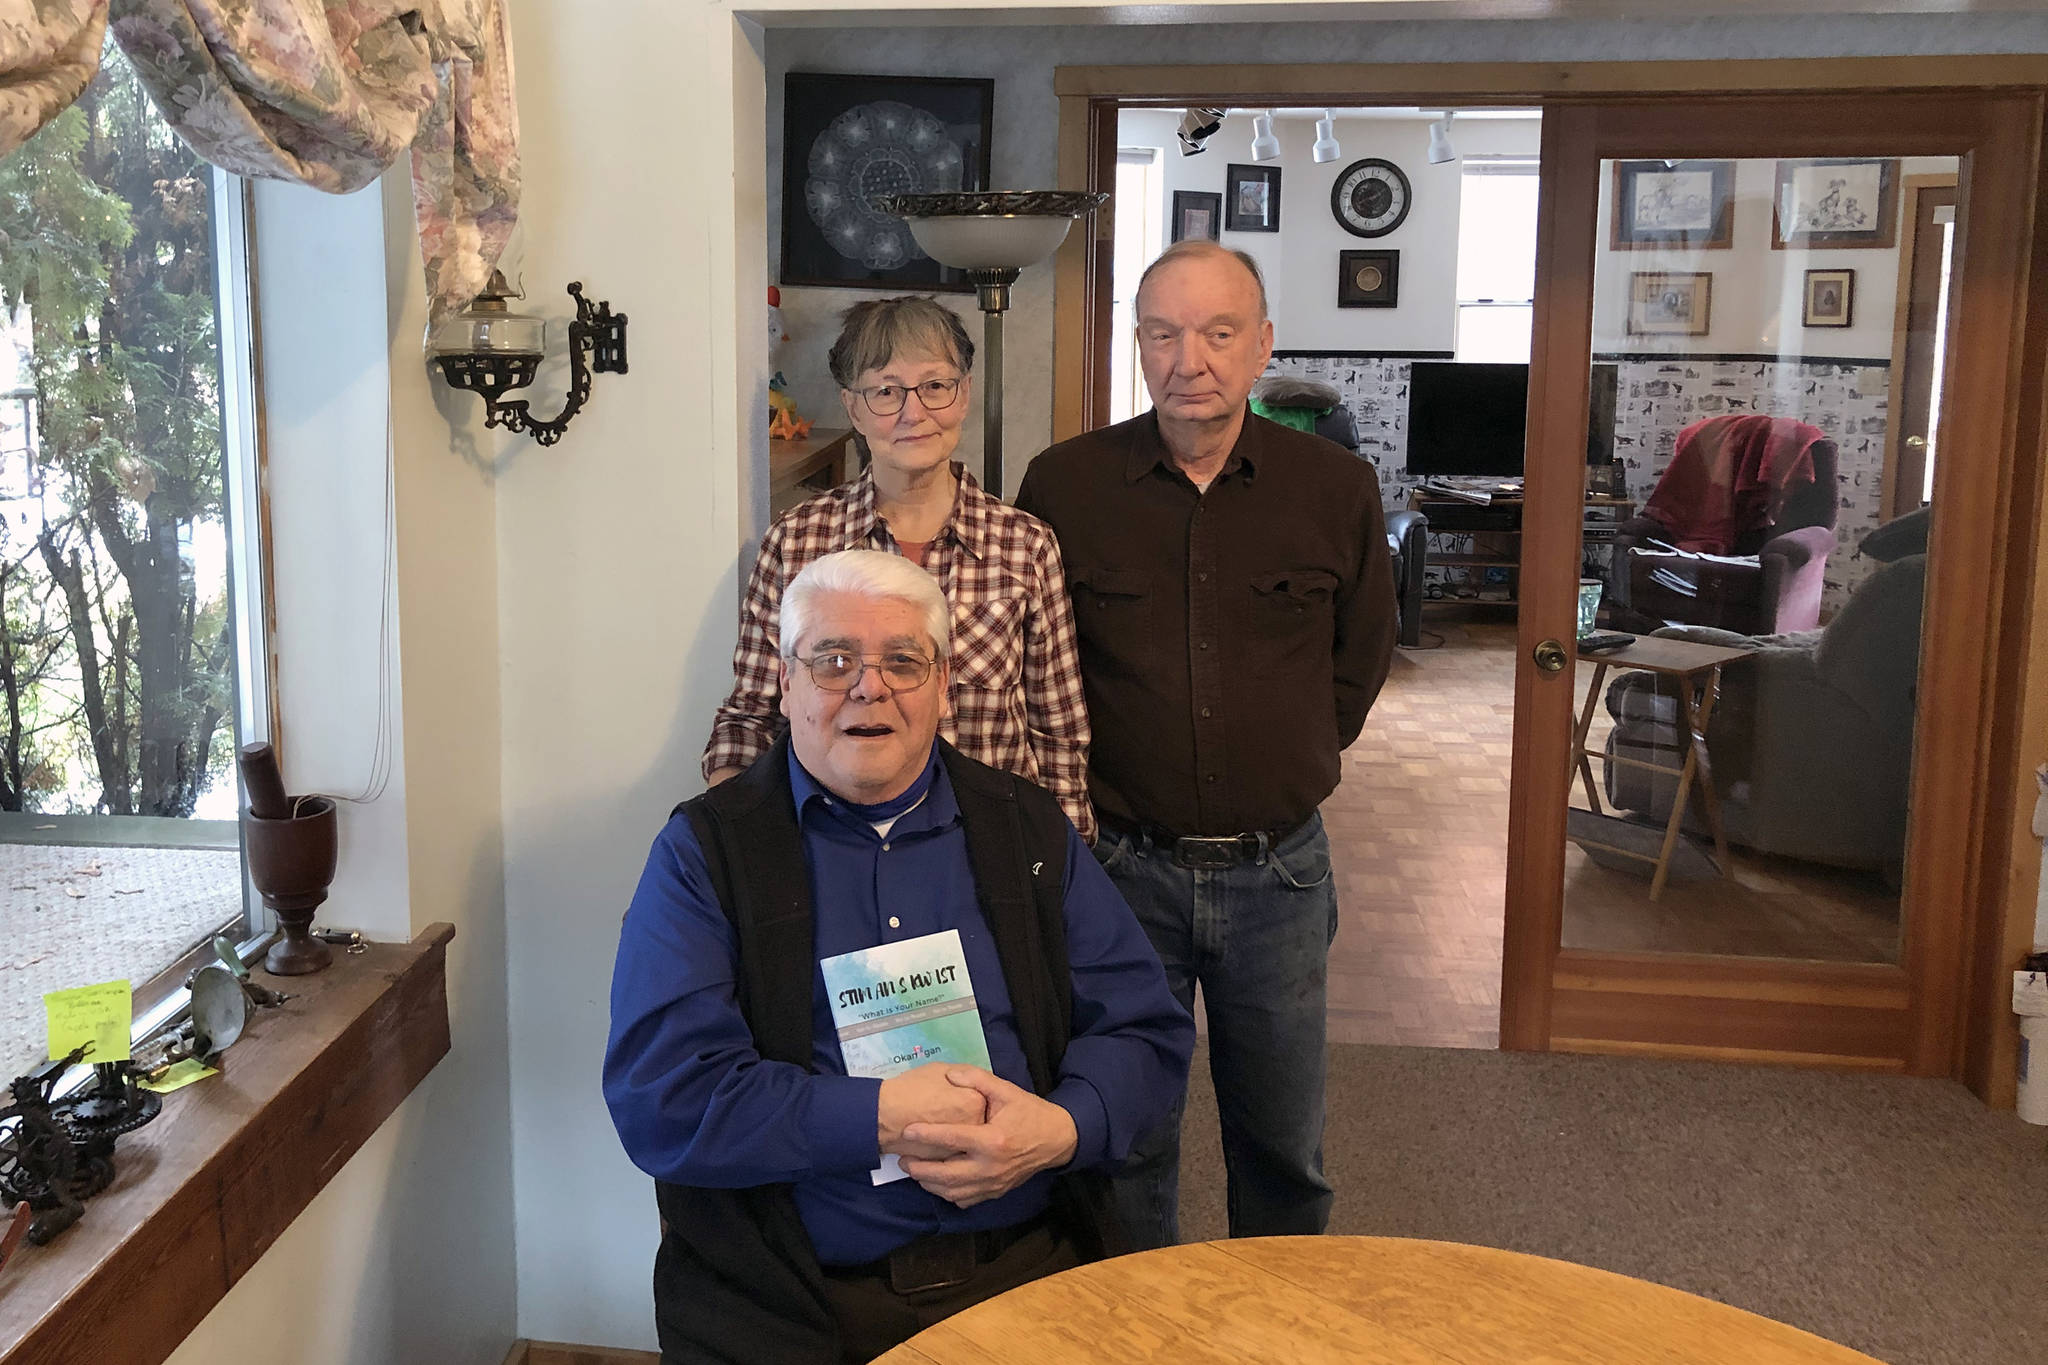 Gary DeVon / staff photo
Arnie Marchand with his new book “What is Your Name?” and his publishers Kay and Mike Sibley at their home in Oroville.